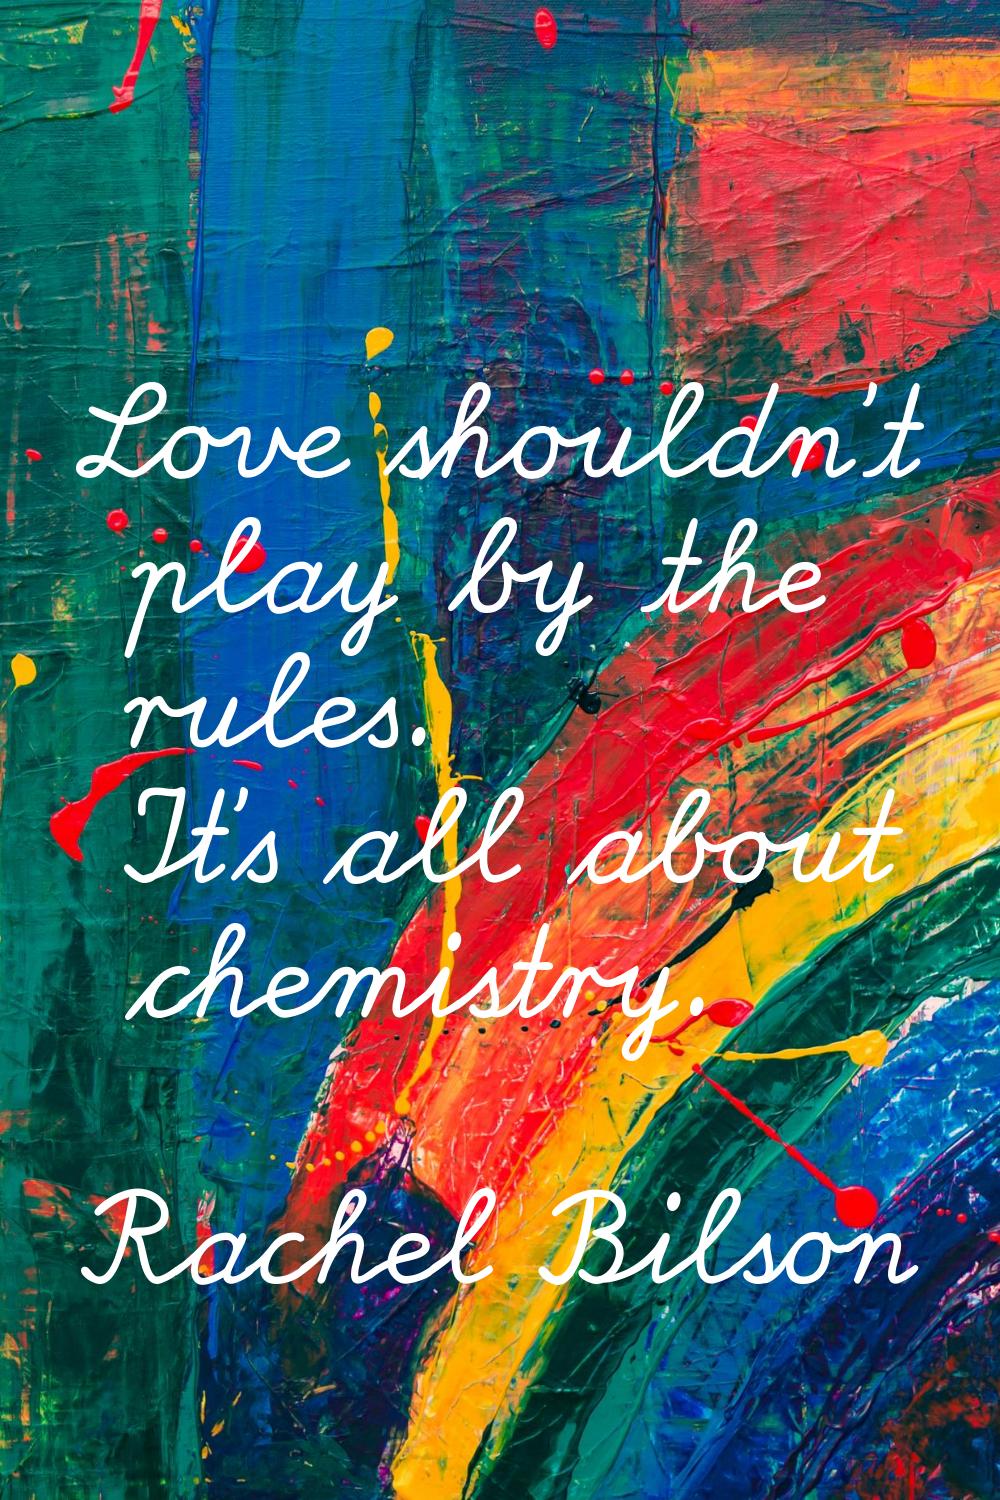 Love shouldn't play by the rules. It's all about chemistry.